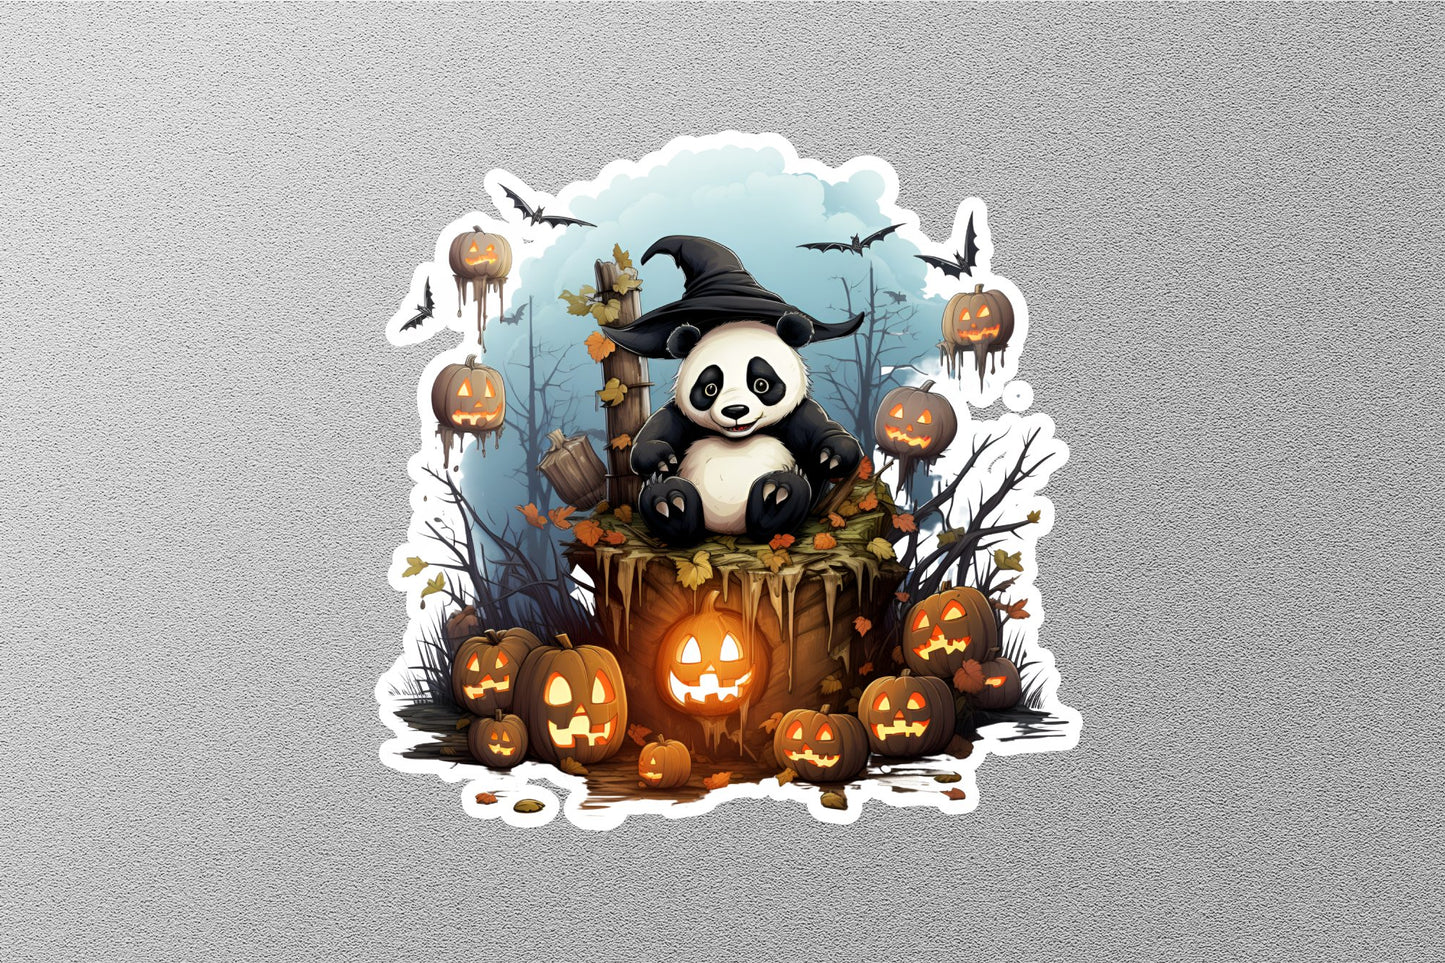 Panda With Hat And Smiley Pumpkins Halloween Sticker